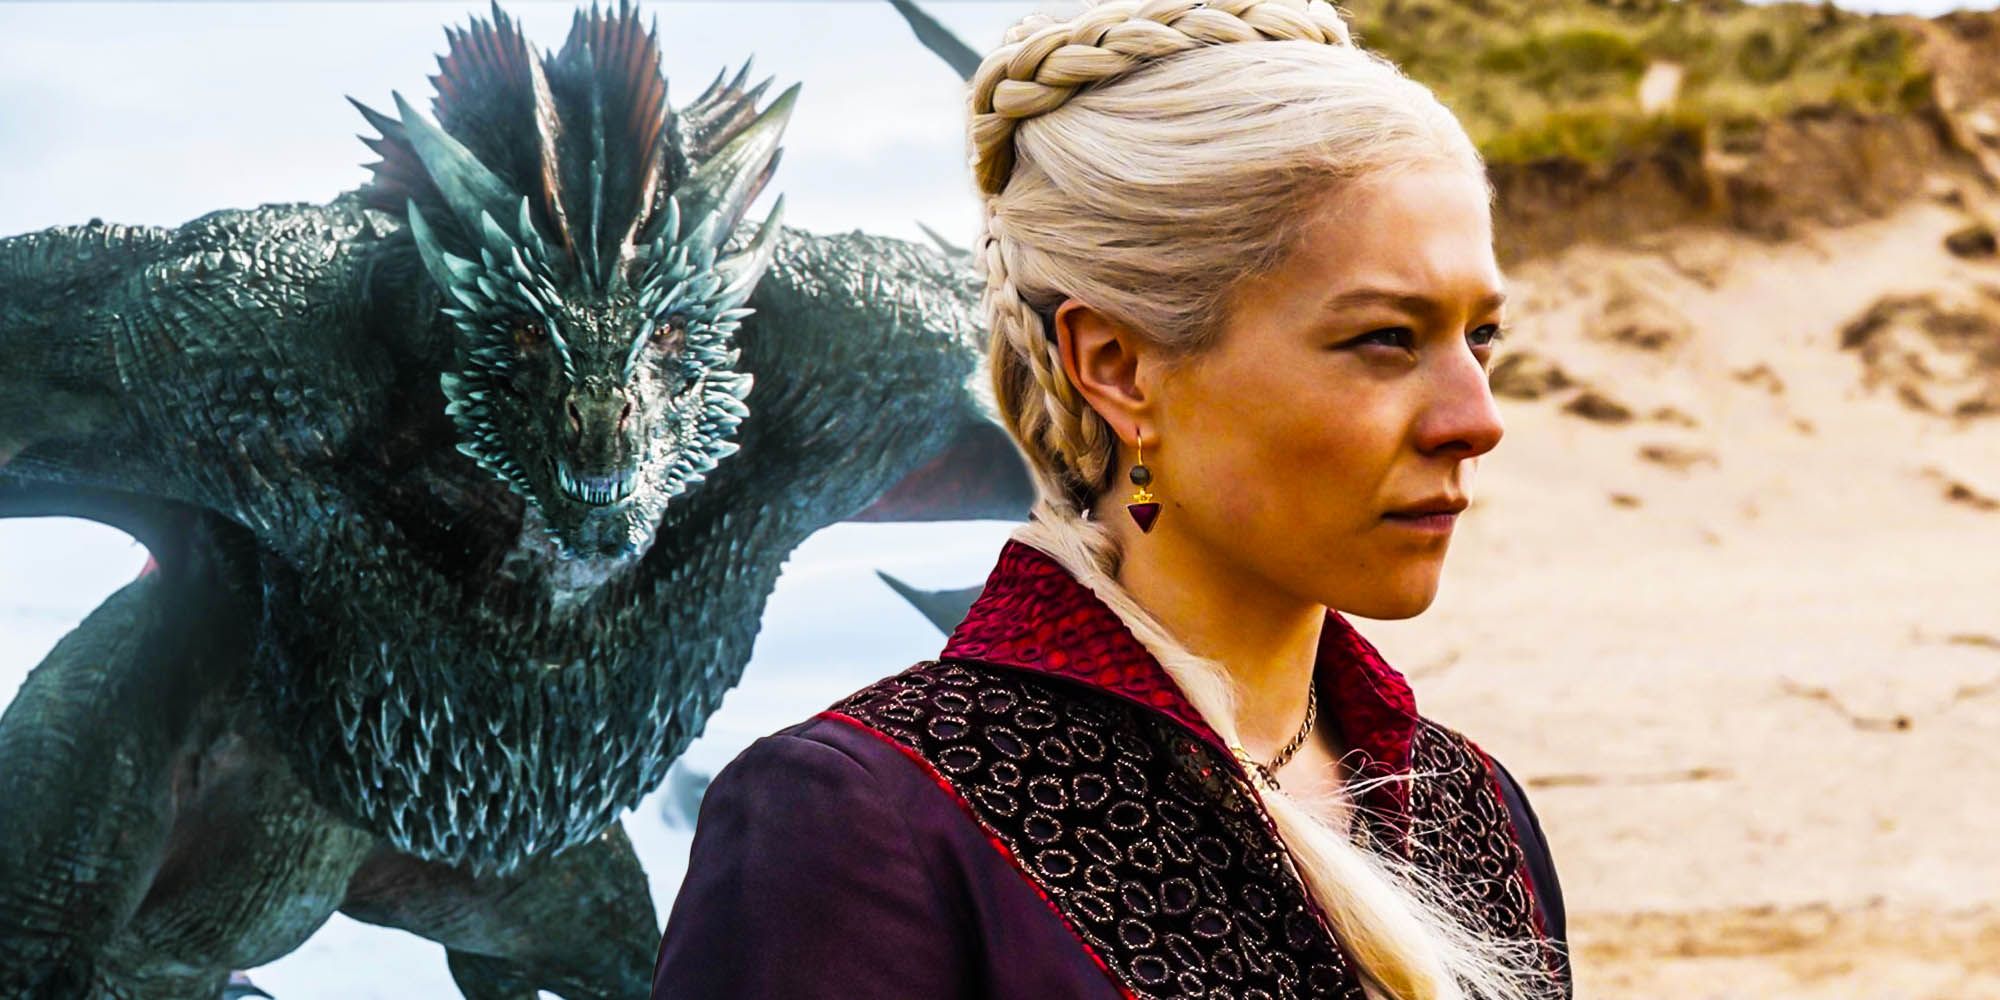 House of dragons avoid wasting its best future dragons